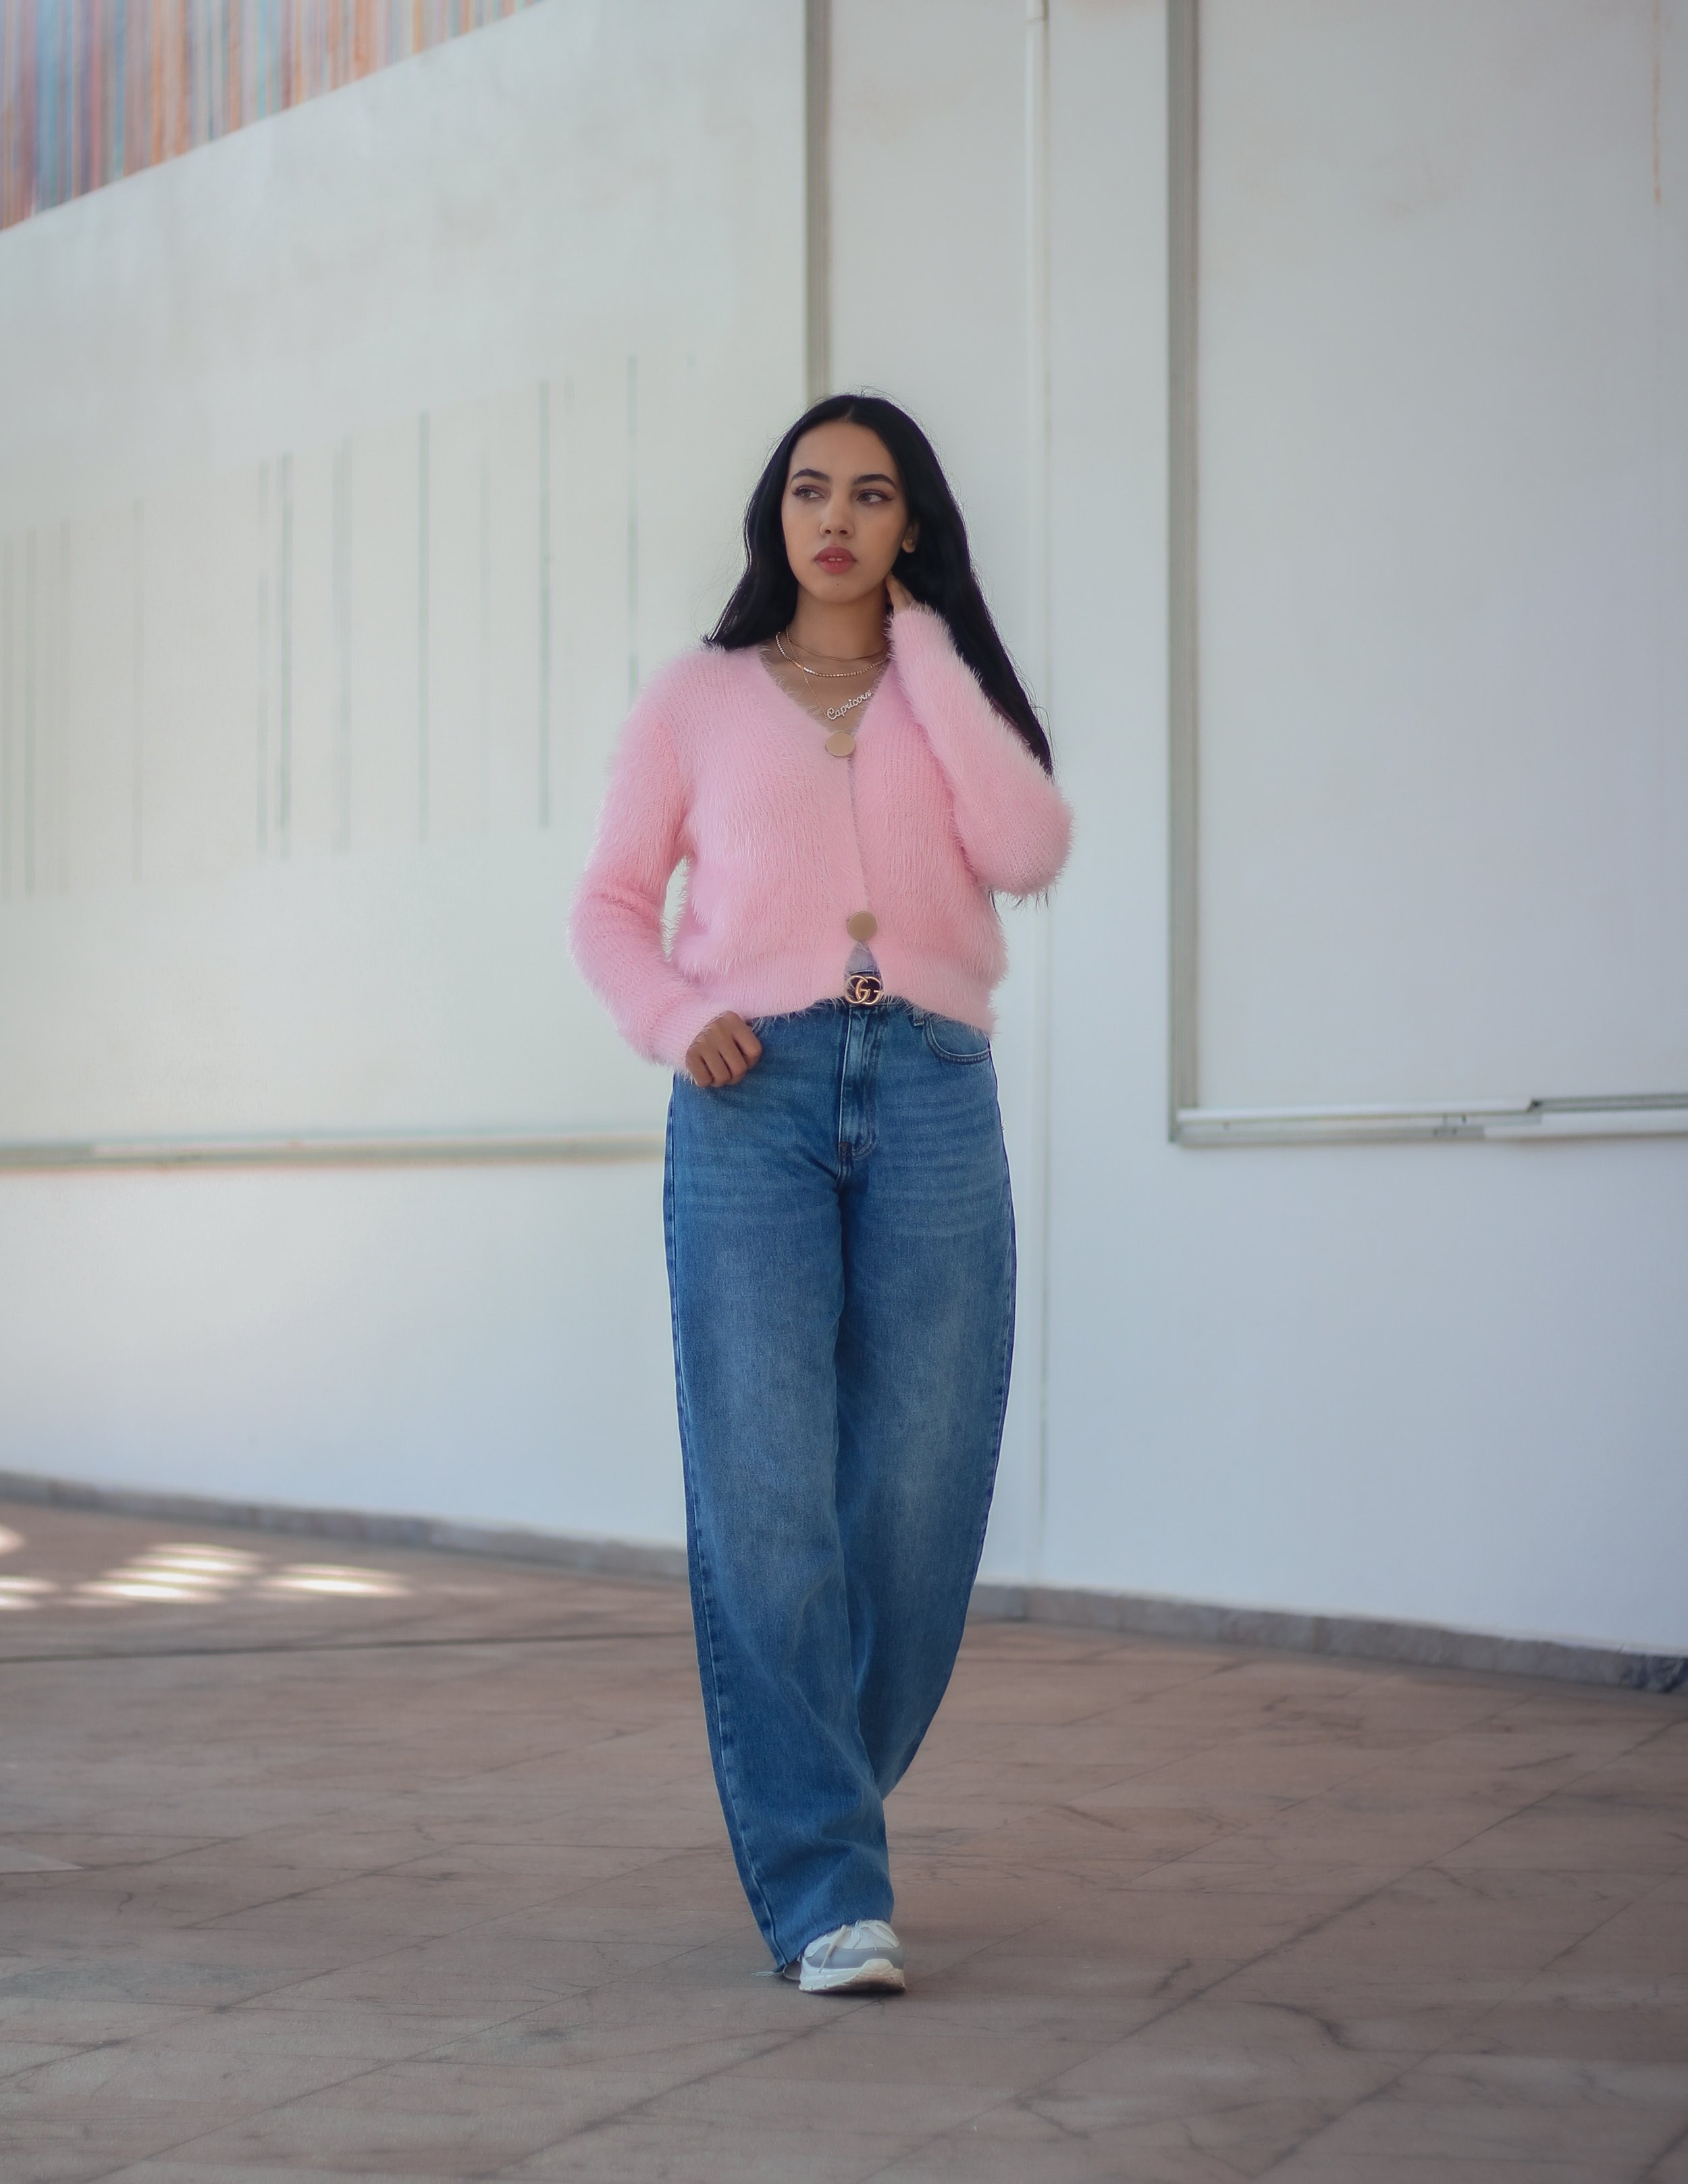 Master the Wide Leg Jeans Trend: Styling Tips & Outfit Ideas for